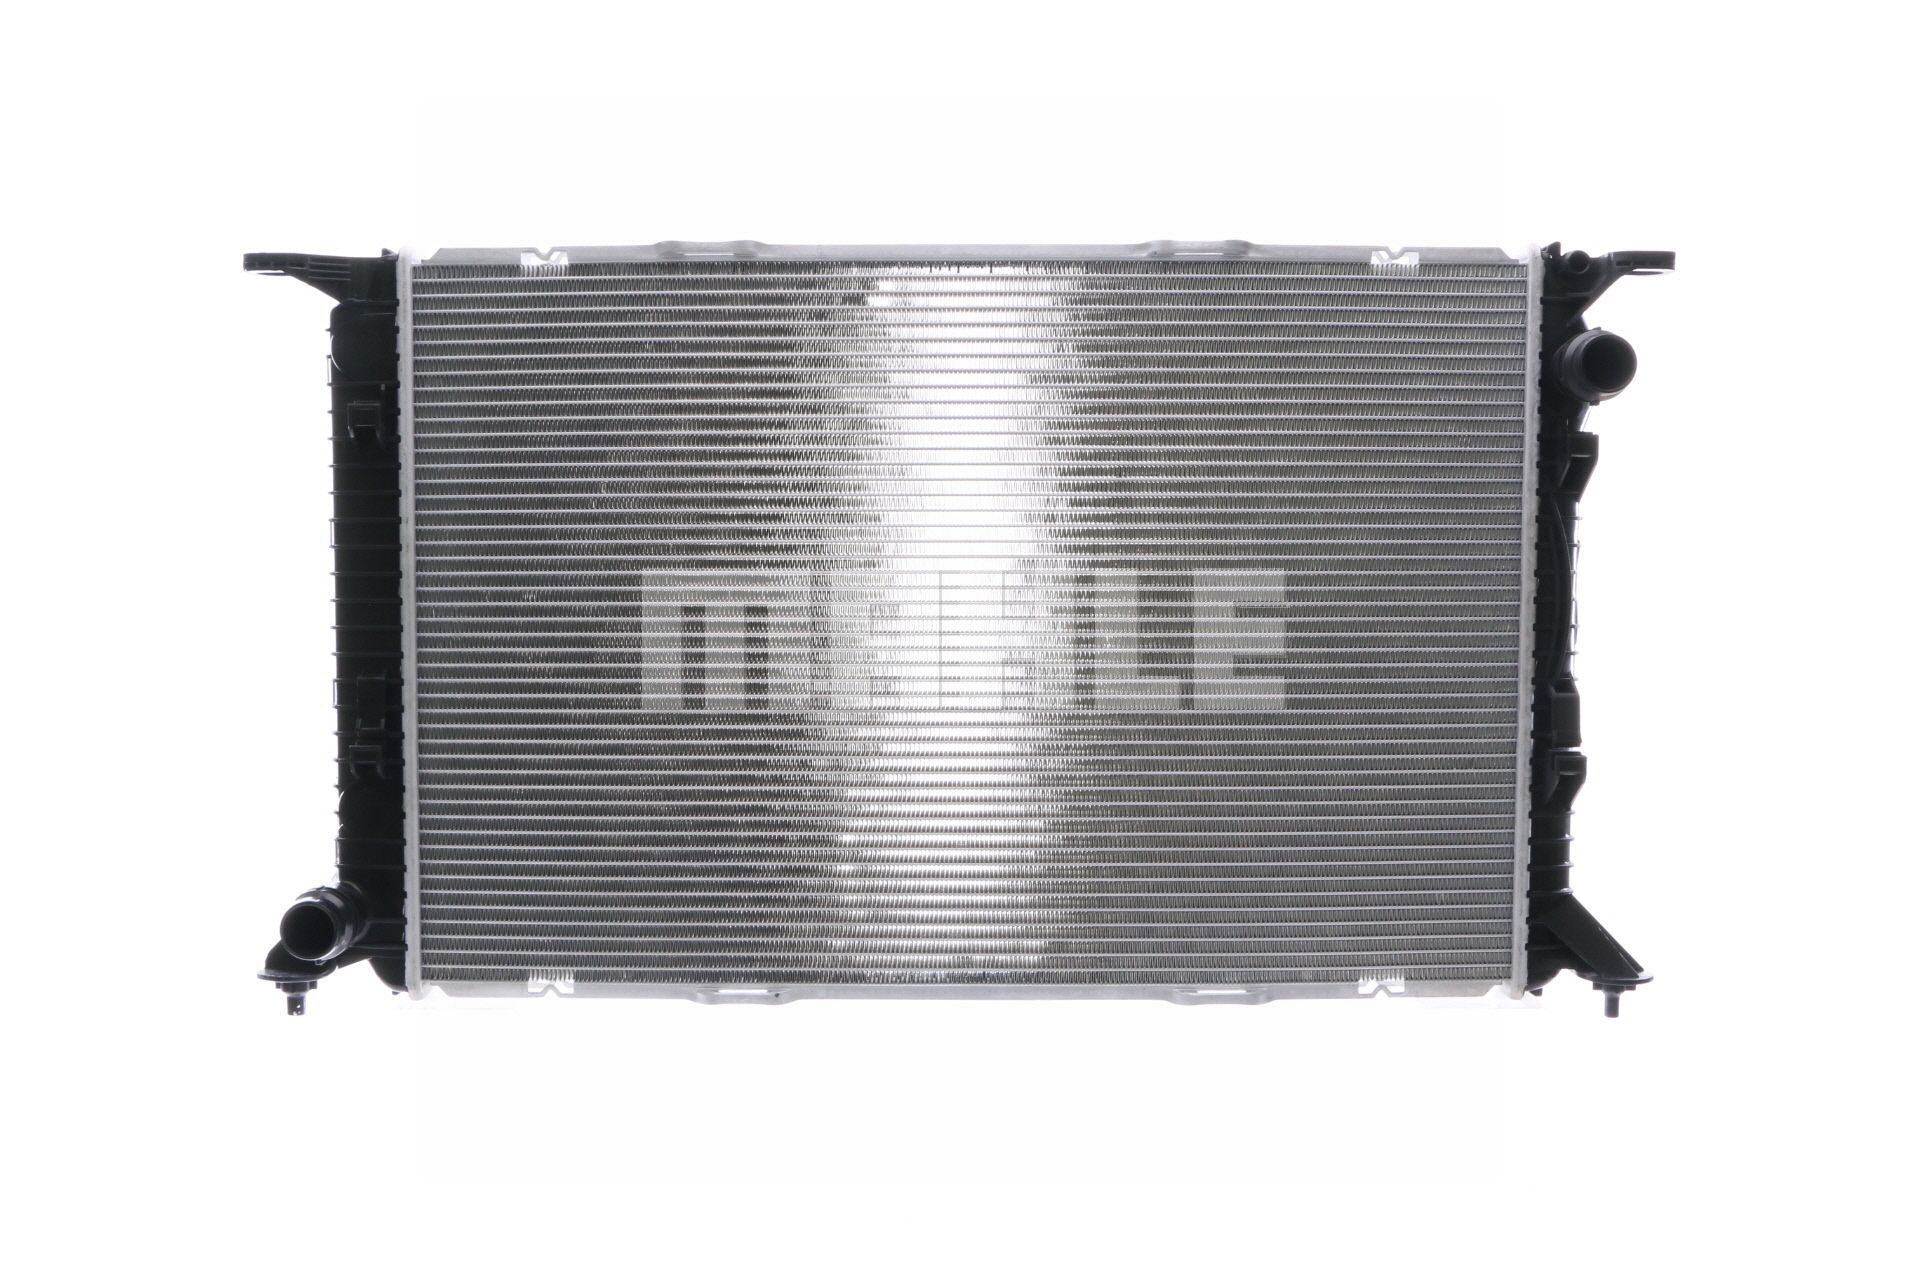 MAHLE ORIGINAL CR 1132 000S Engine radiator for vehicles with/without air conditioning, 720 x 468 x 32 mm, Manual Transmission, Brazed cooling fins